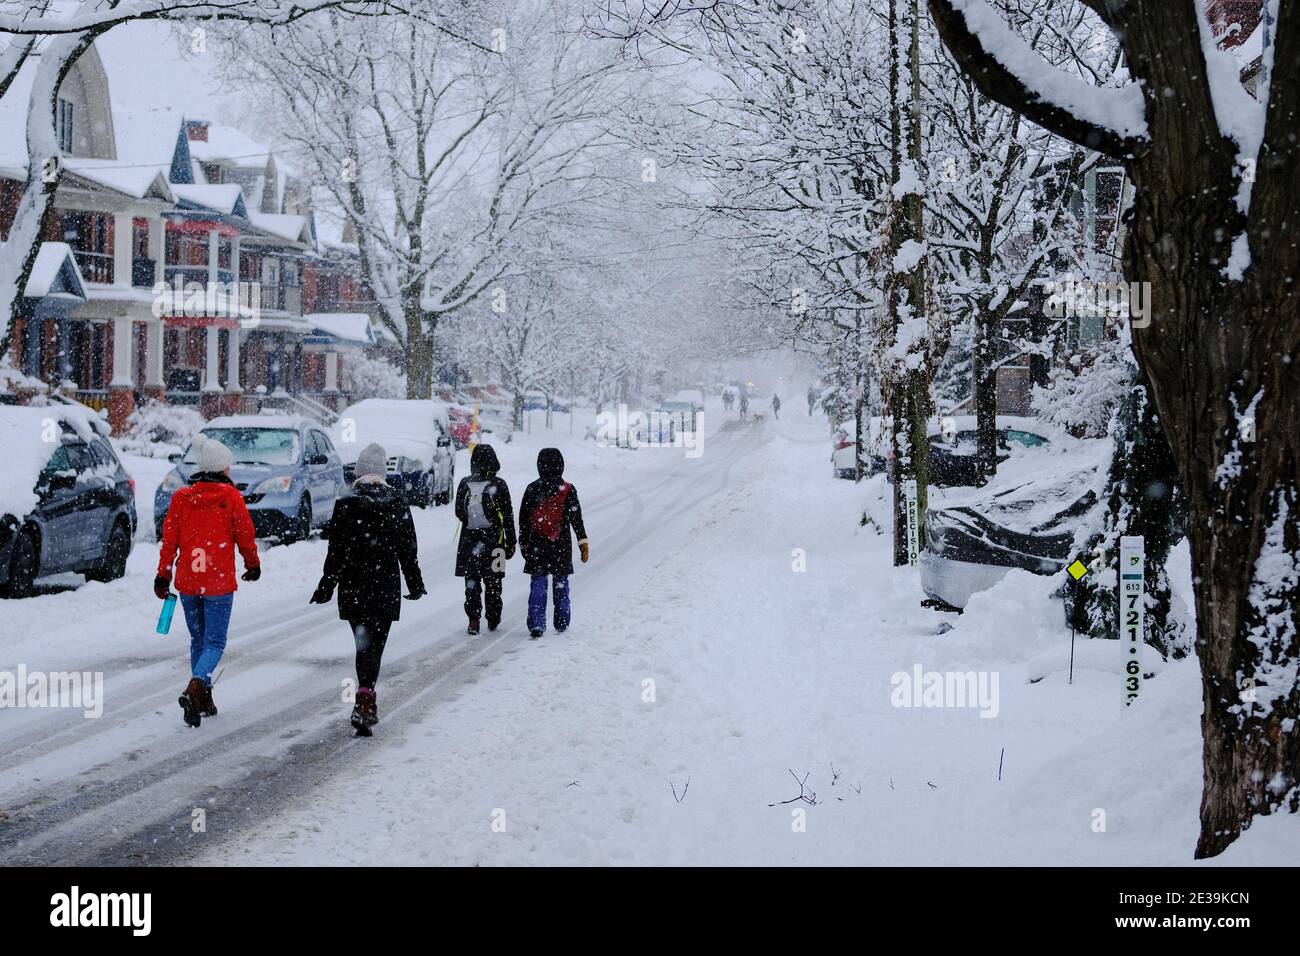 Snowy Ottawa - images from around town during a 25cm dump of snow. Pedestrians make their way down snowy streets in Ottawa, Ontario, Canada. Stock Photo